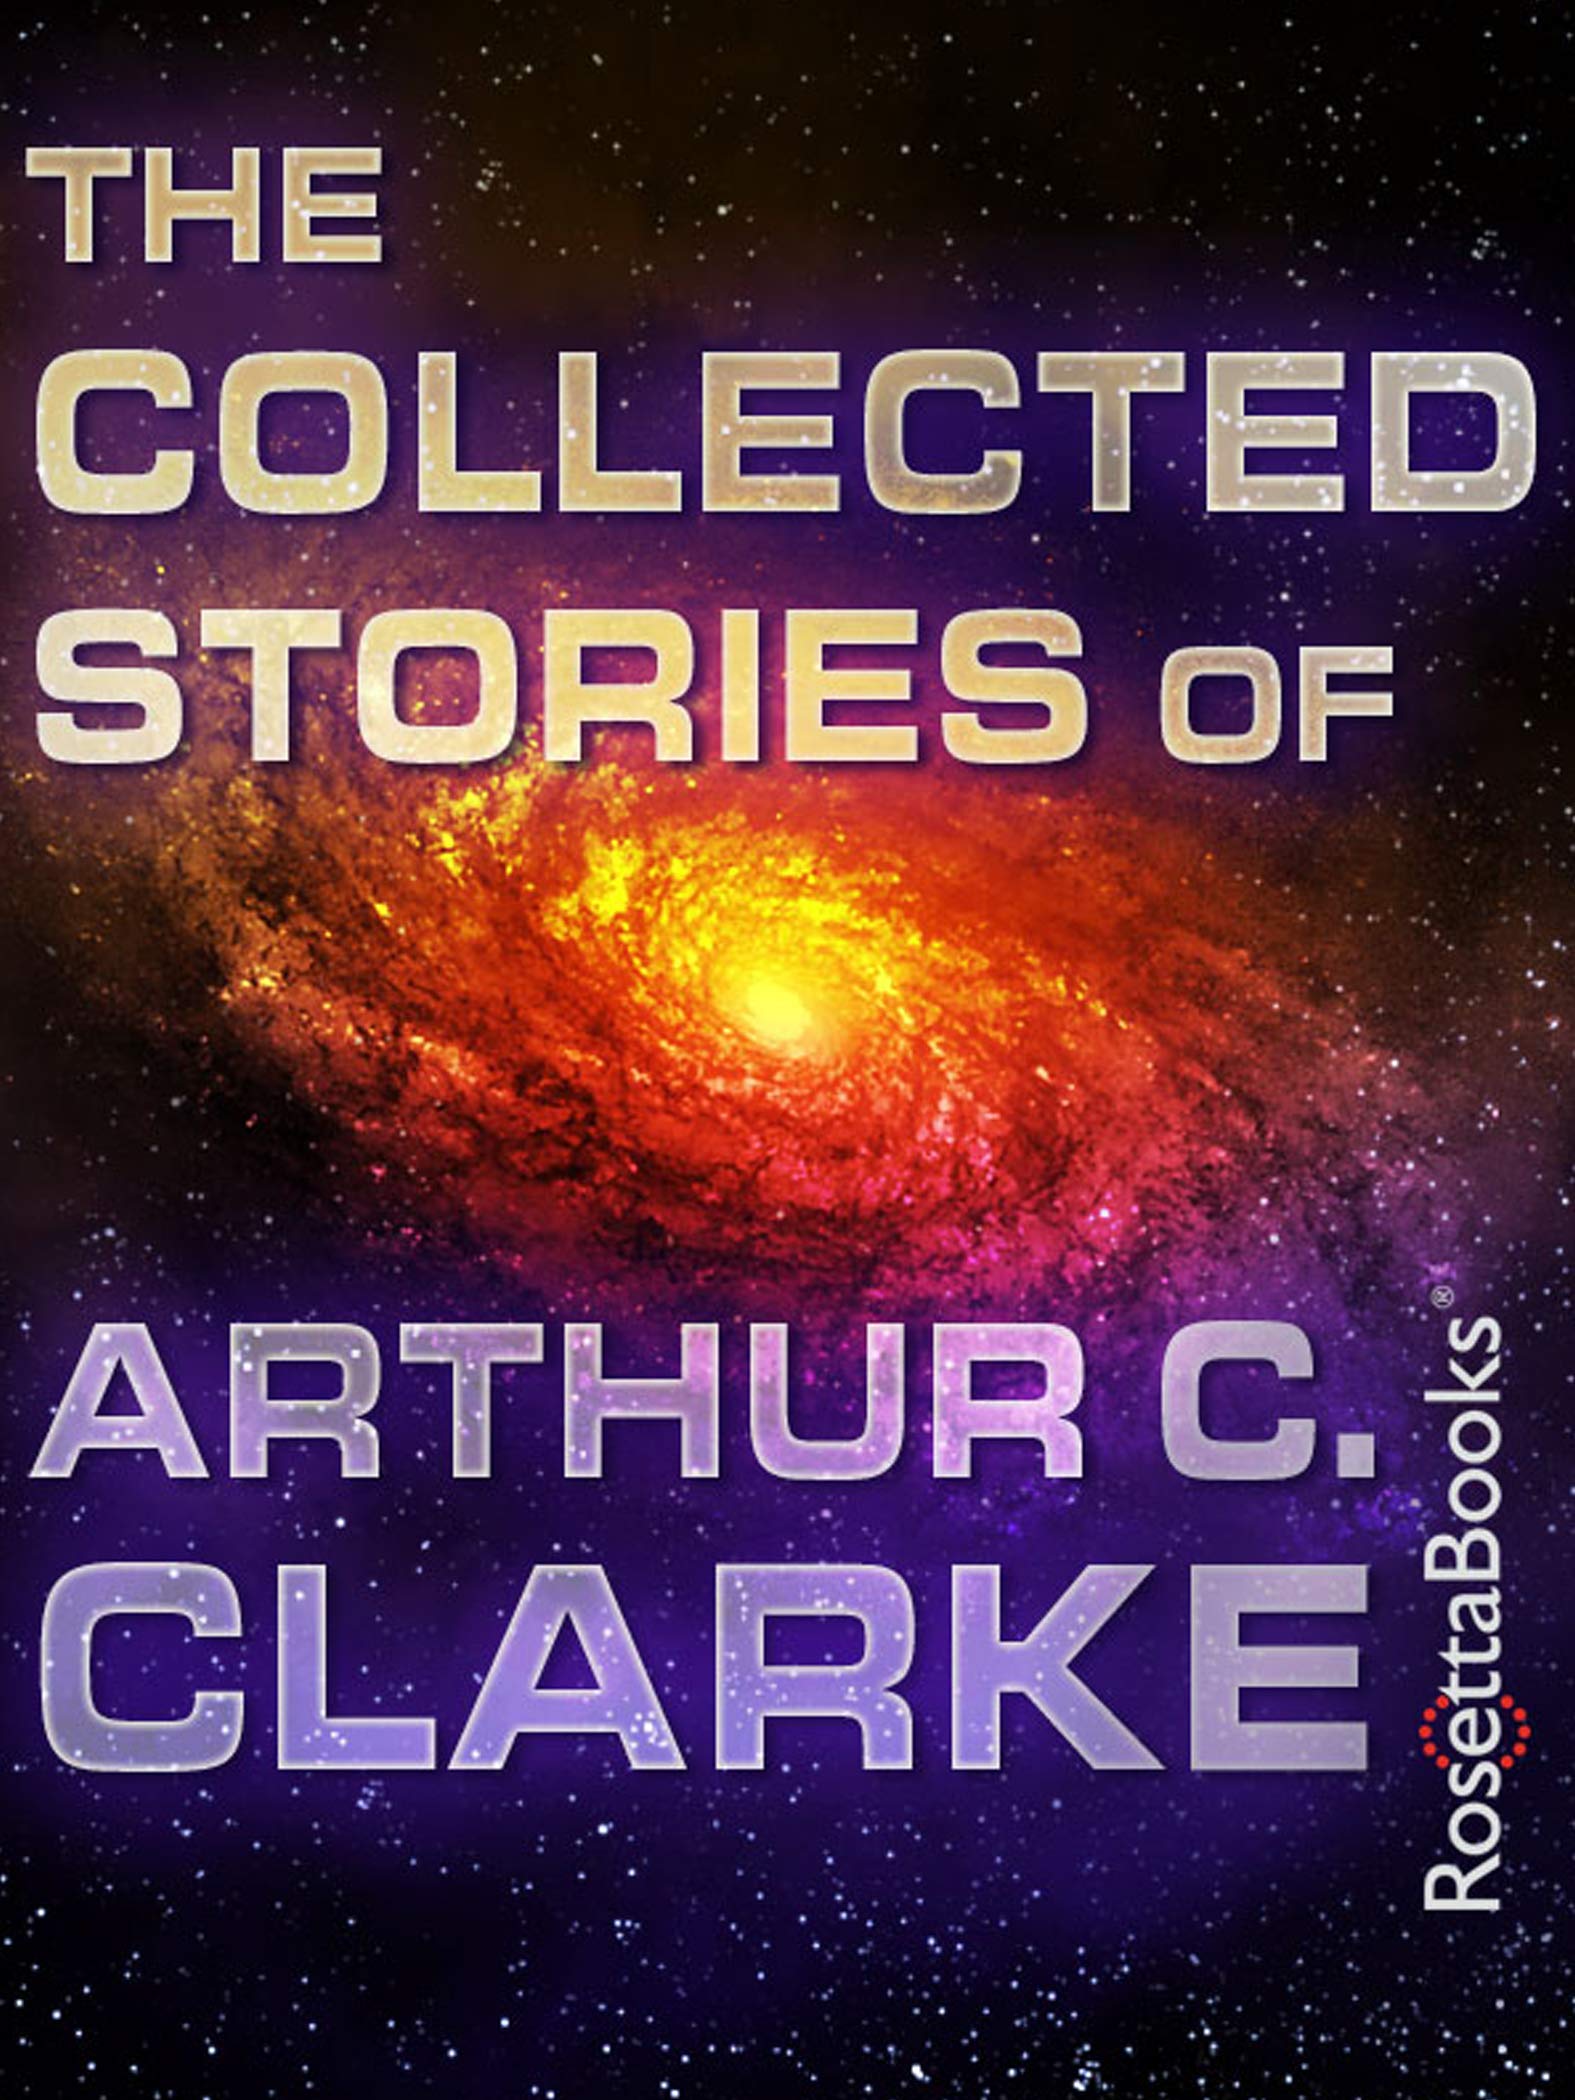 The Collected Stories of Arthur C. Clarke [Kindle Edition] $3 ~ Amazon